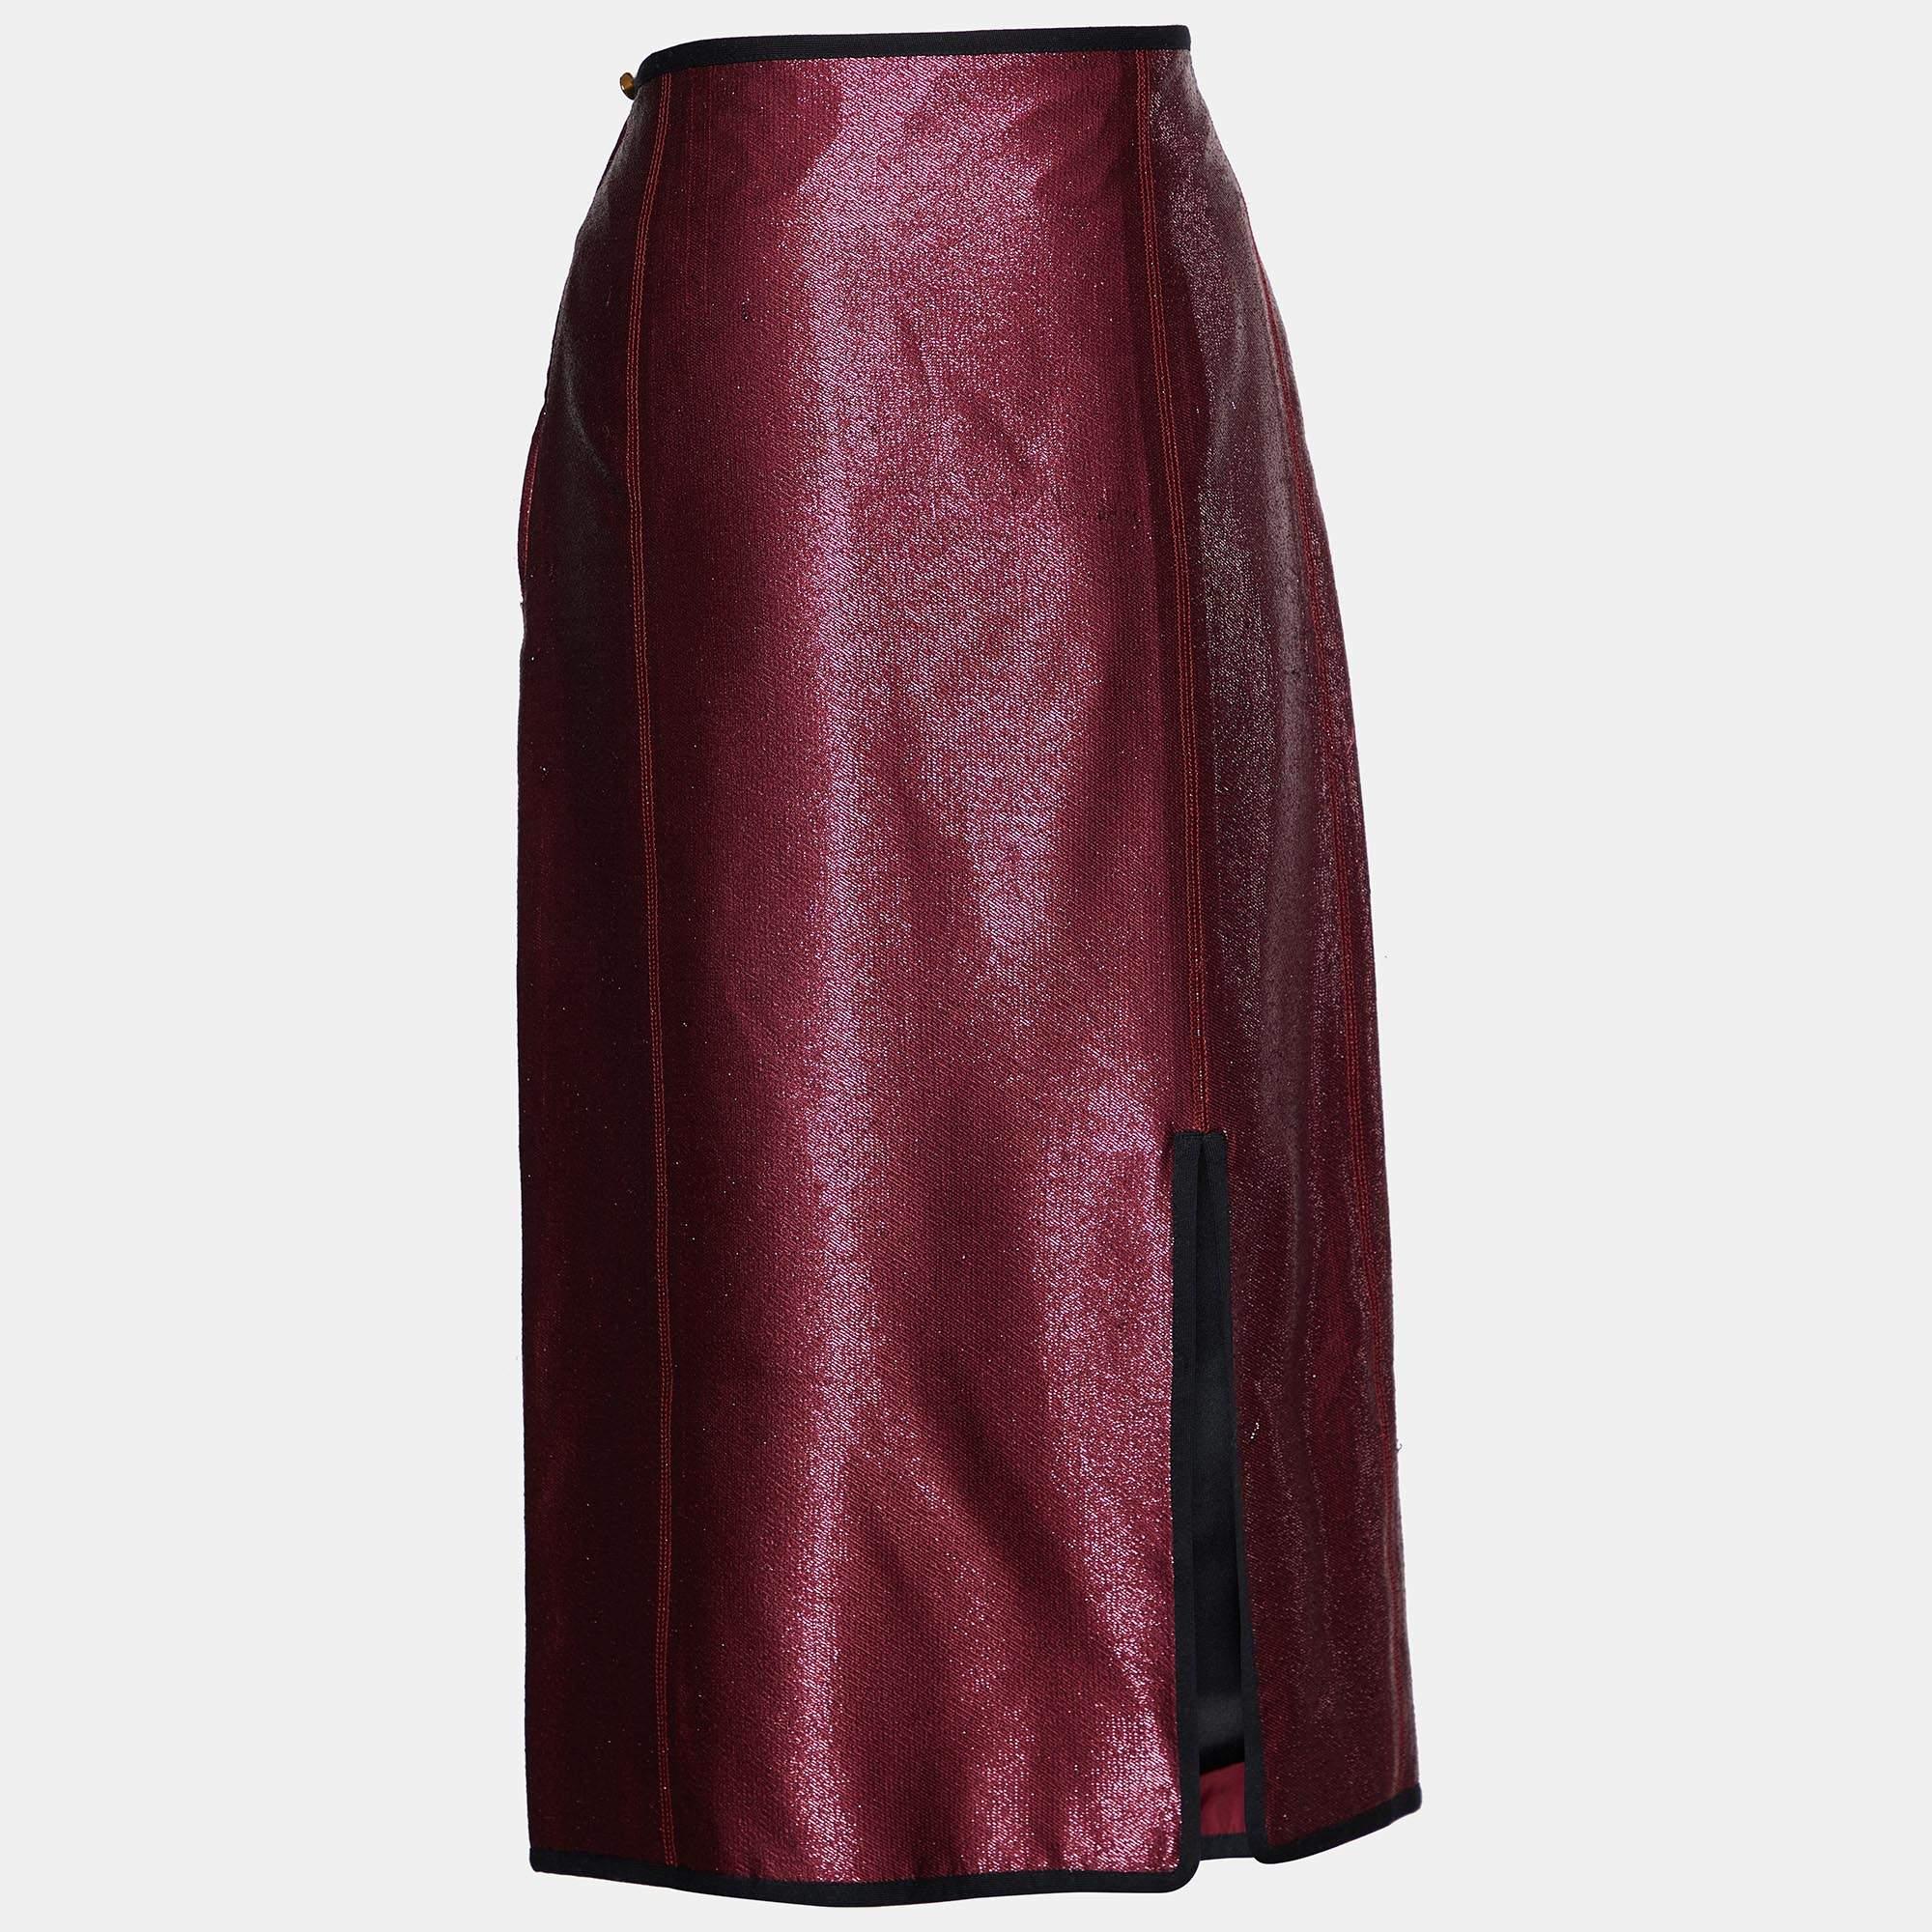 This elegant LV skirt is worth adding to your closet! Crafted from fine materials, it is exquisitely designed into a flattering shape.

Includes: Original Hanger